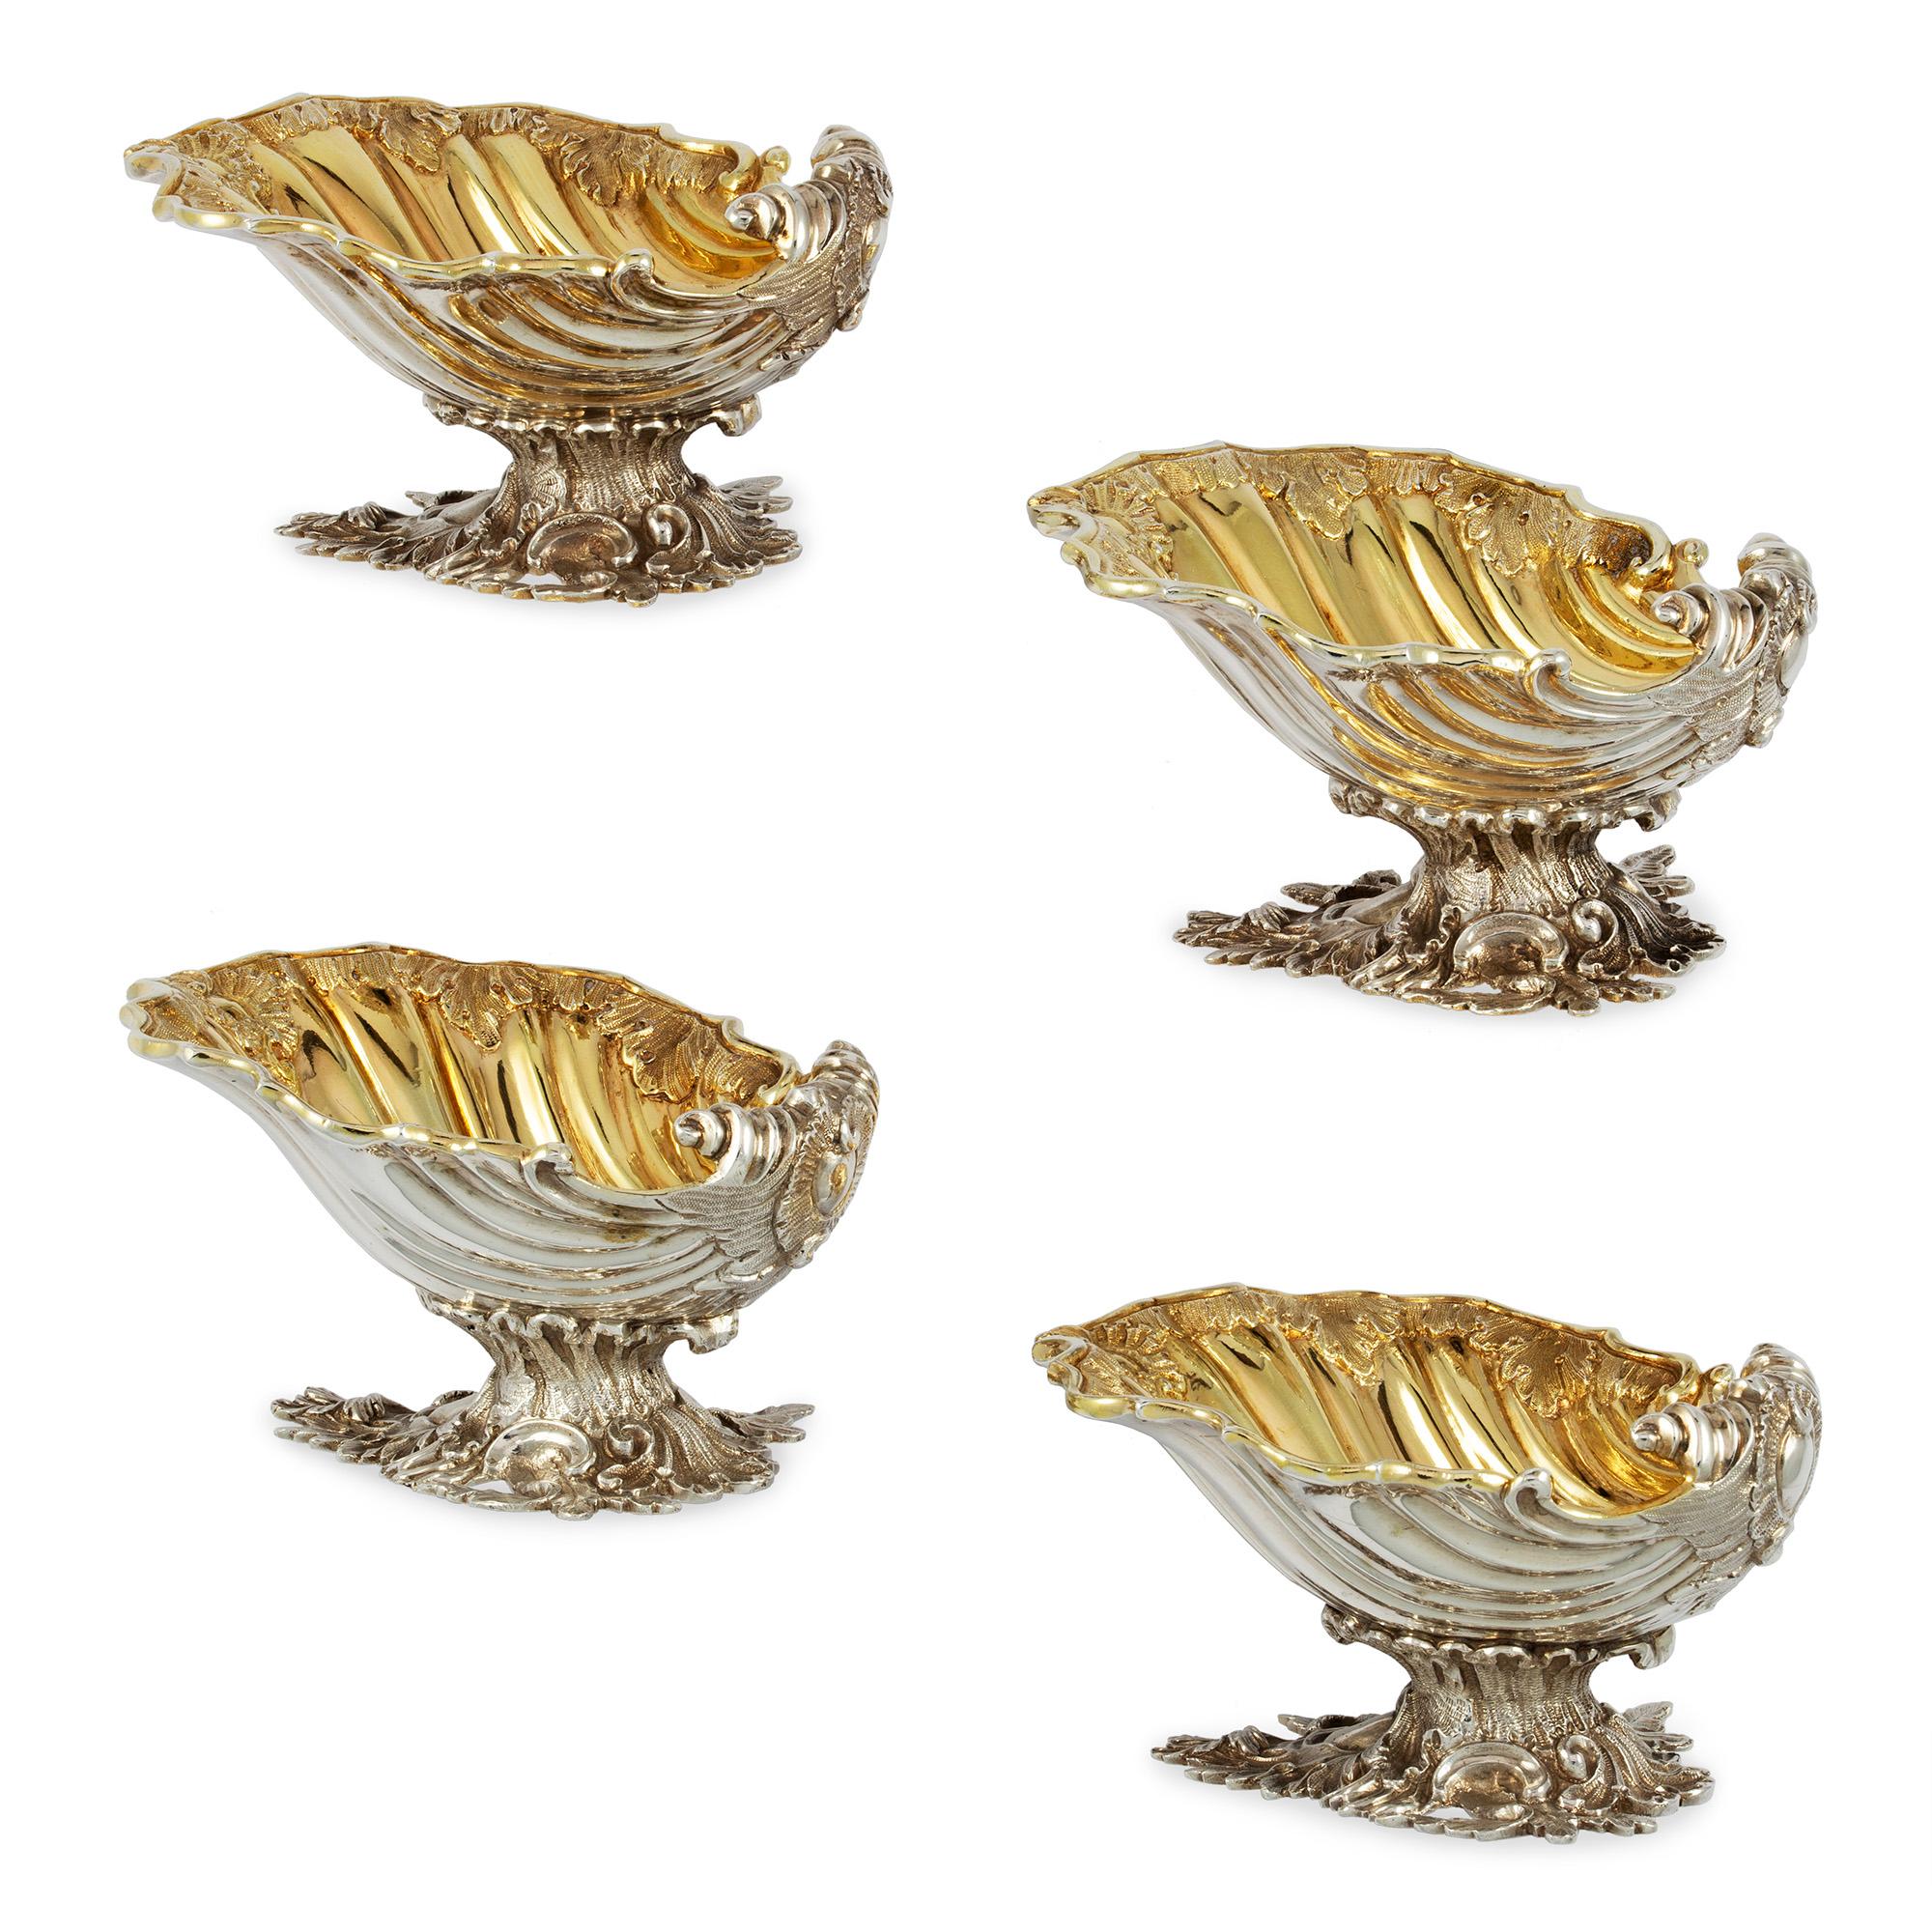 A set of four Victorian silver salt cellars, each designed as scallop shell bearing chased leaf decorations in the rim, with gold gilt interior and foliate design base, made by Daniel & Charles Houle, London 1853 & 1855, gross weight 28.5oz,